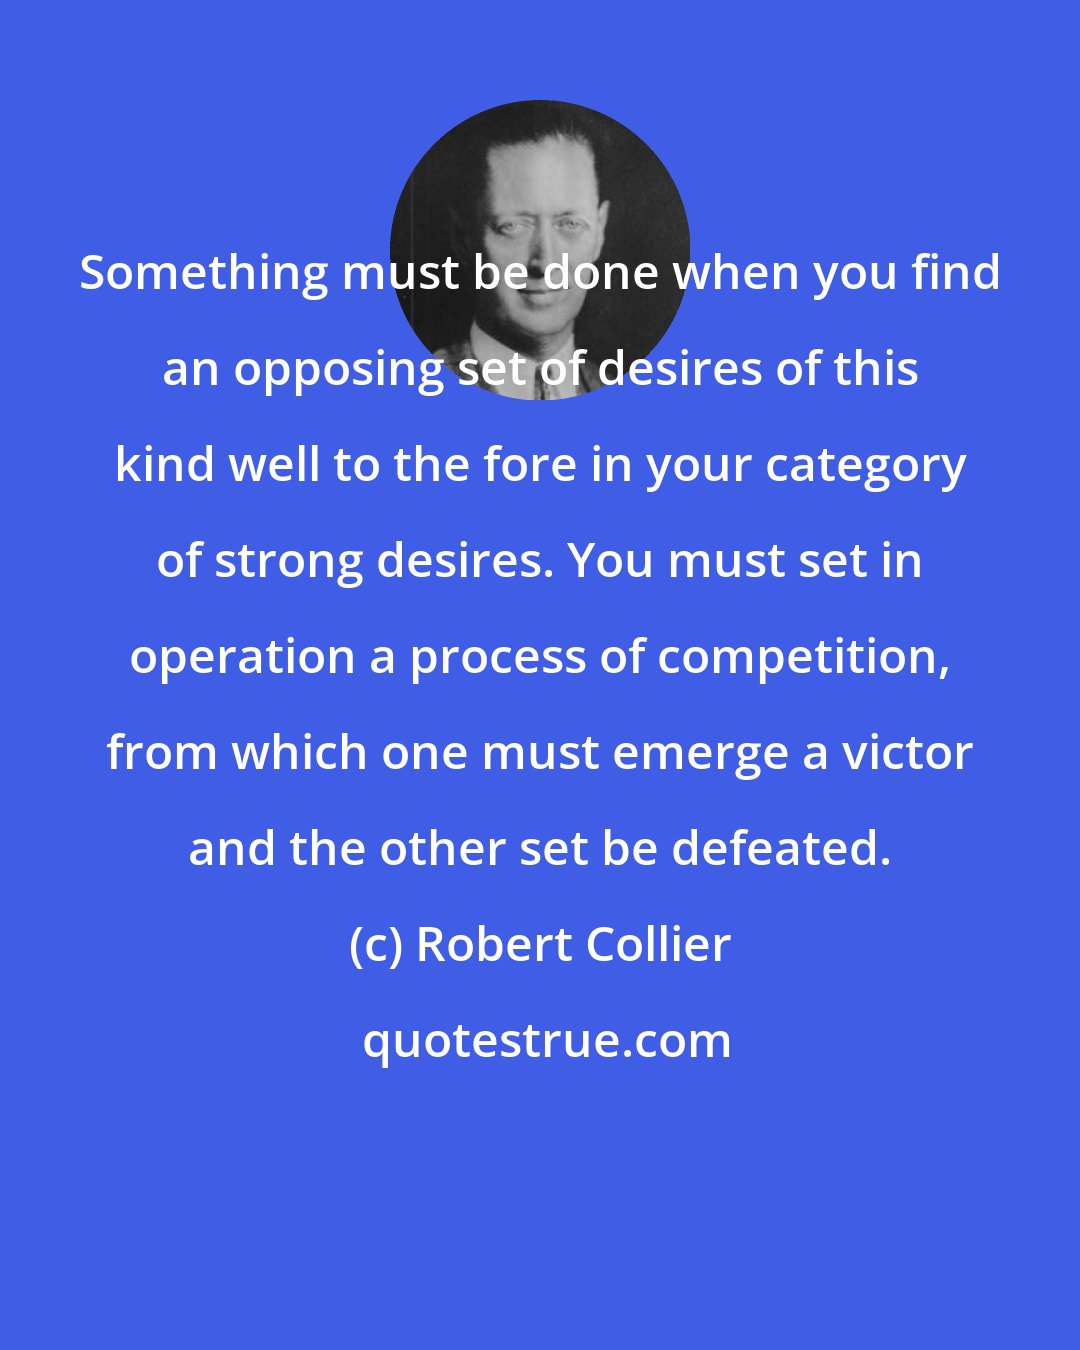 Robert Collier: Something must be done when you find an opposing set of desires of this kind well to the fore in your category of strong desires. You must set in operation a process of competition, from which one must emerge a victor and the other set be defeated.